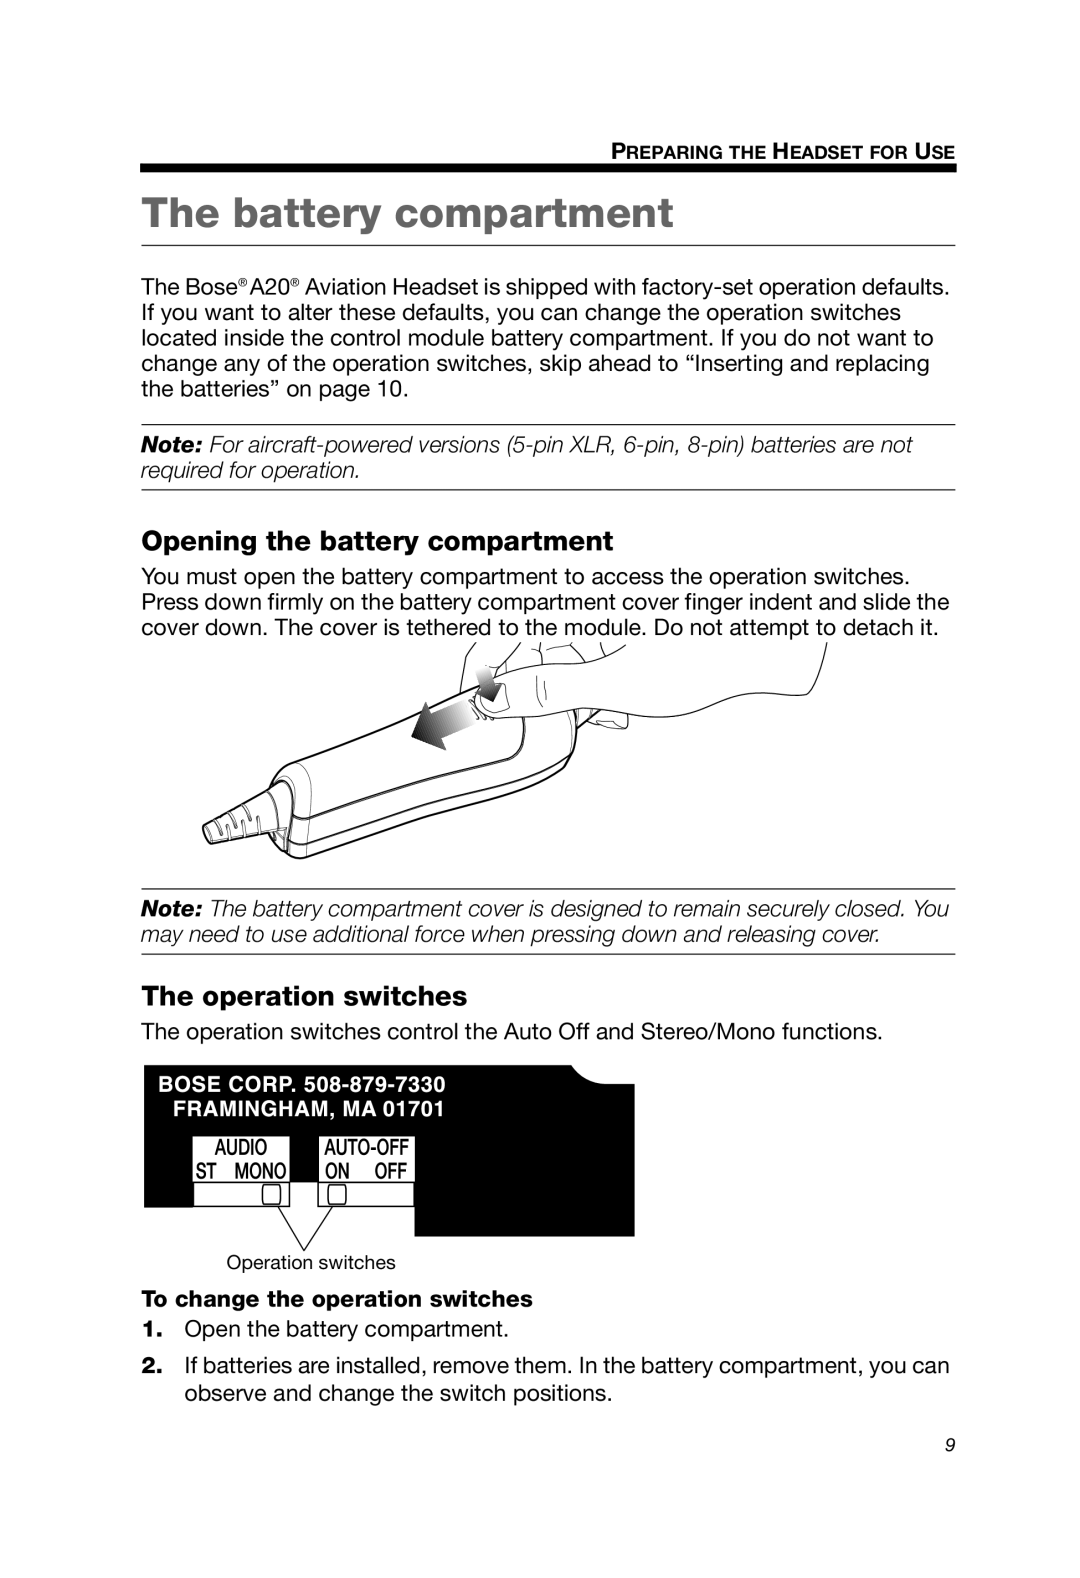 Bose A20 manual The battery compartment, Opening the battery compartment, The operation switches 